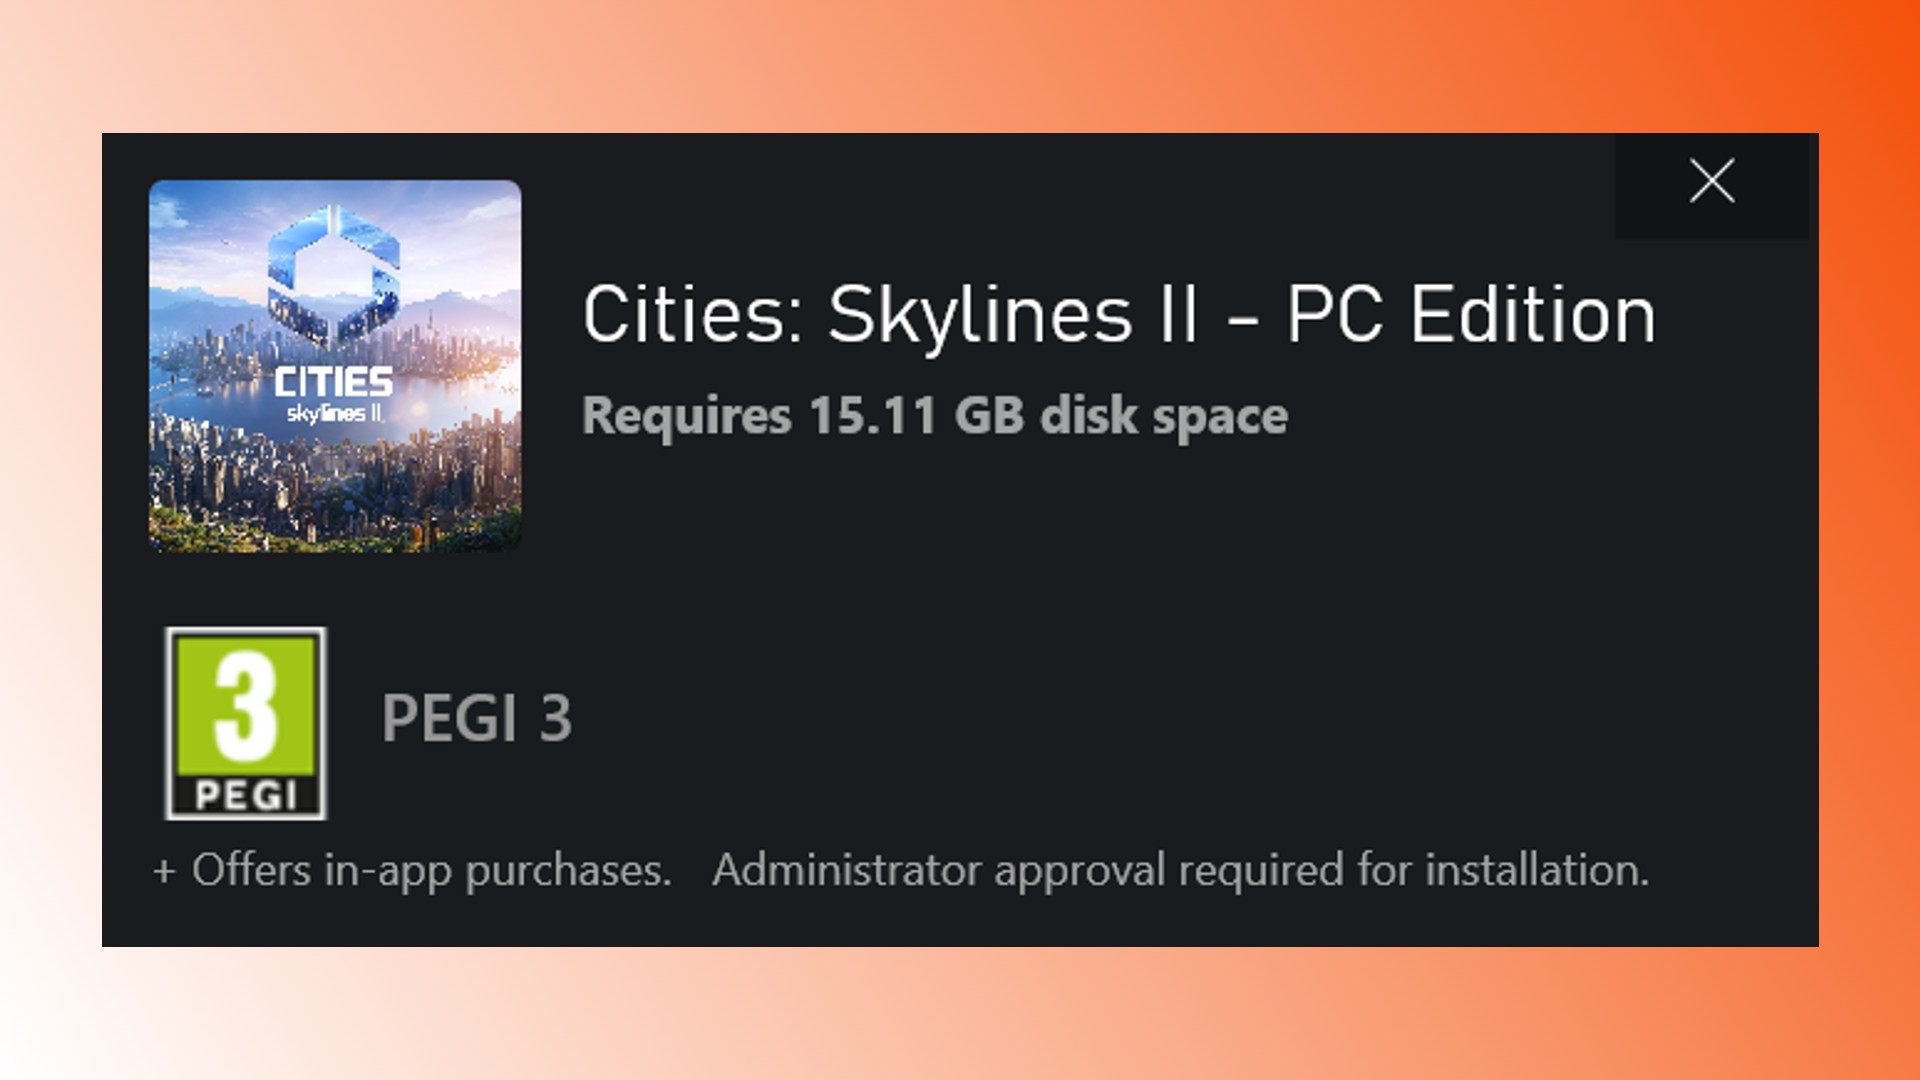 Cities Skylines 2 preload: A message on Game Pass regarding Cities Skylines 2 preload and size